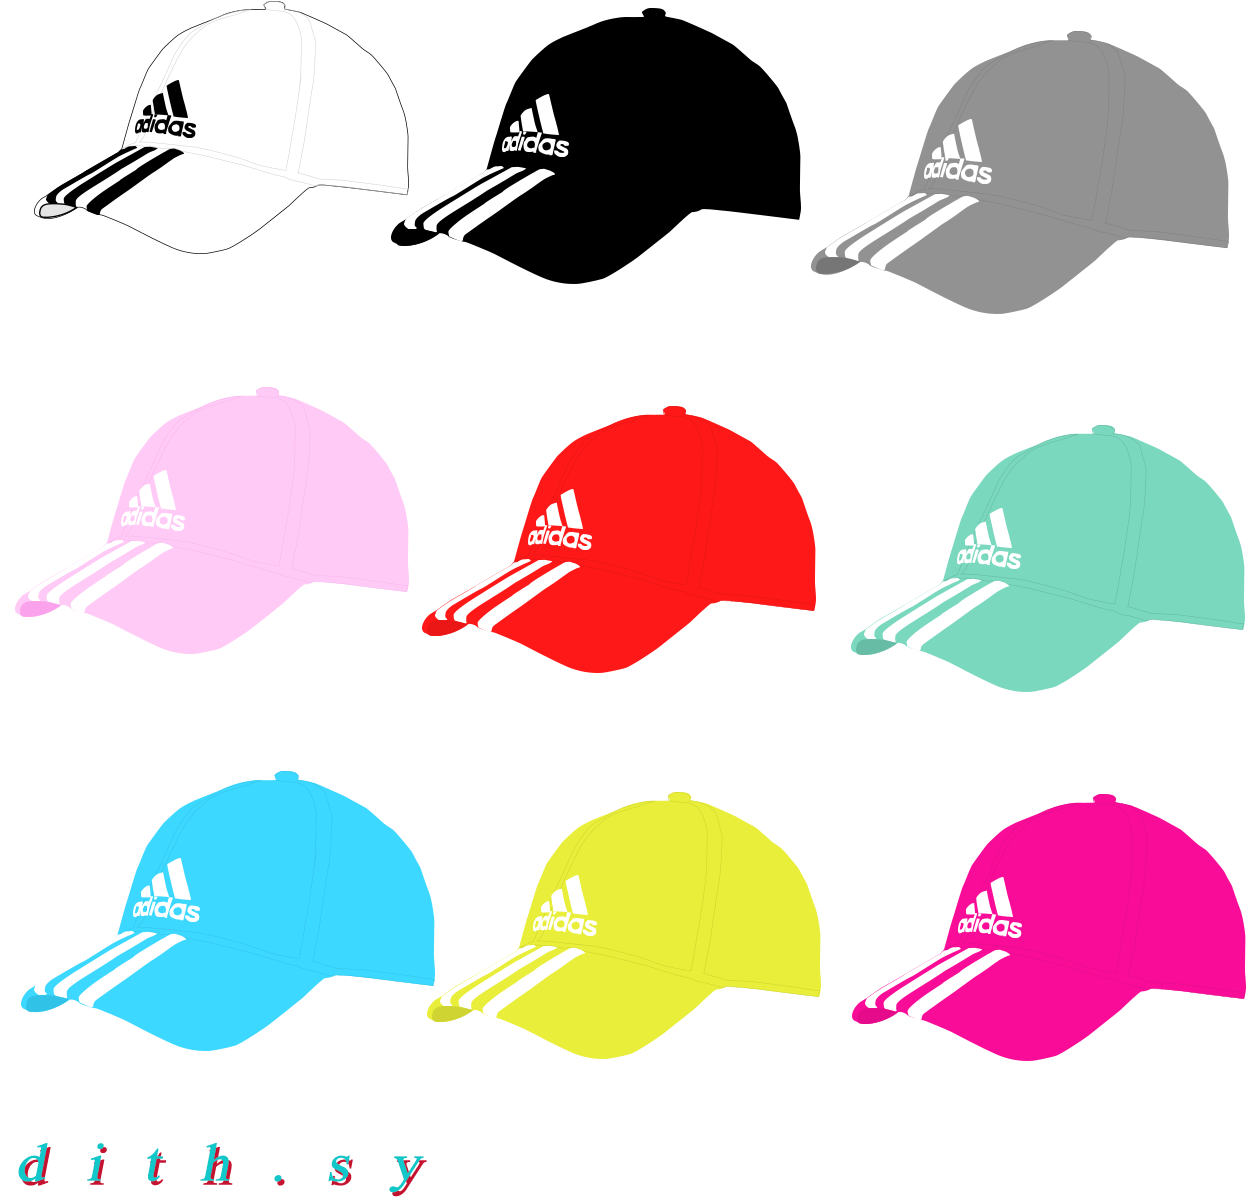 Download Adidas Caps Color Variety | Wallpapers.com